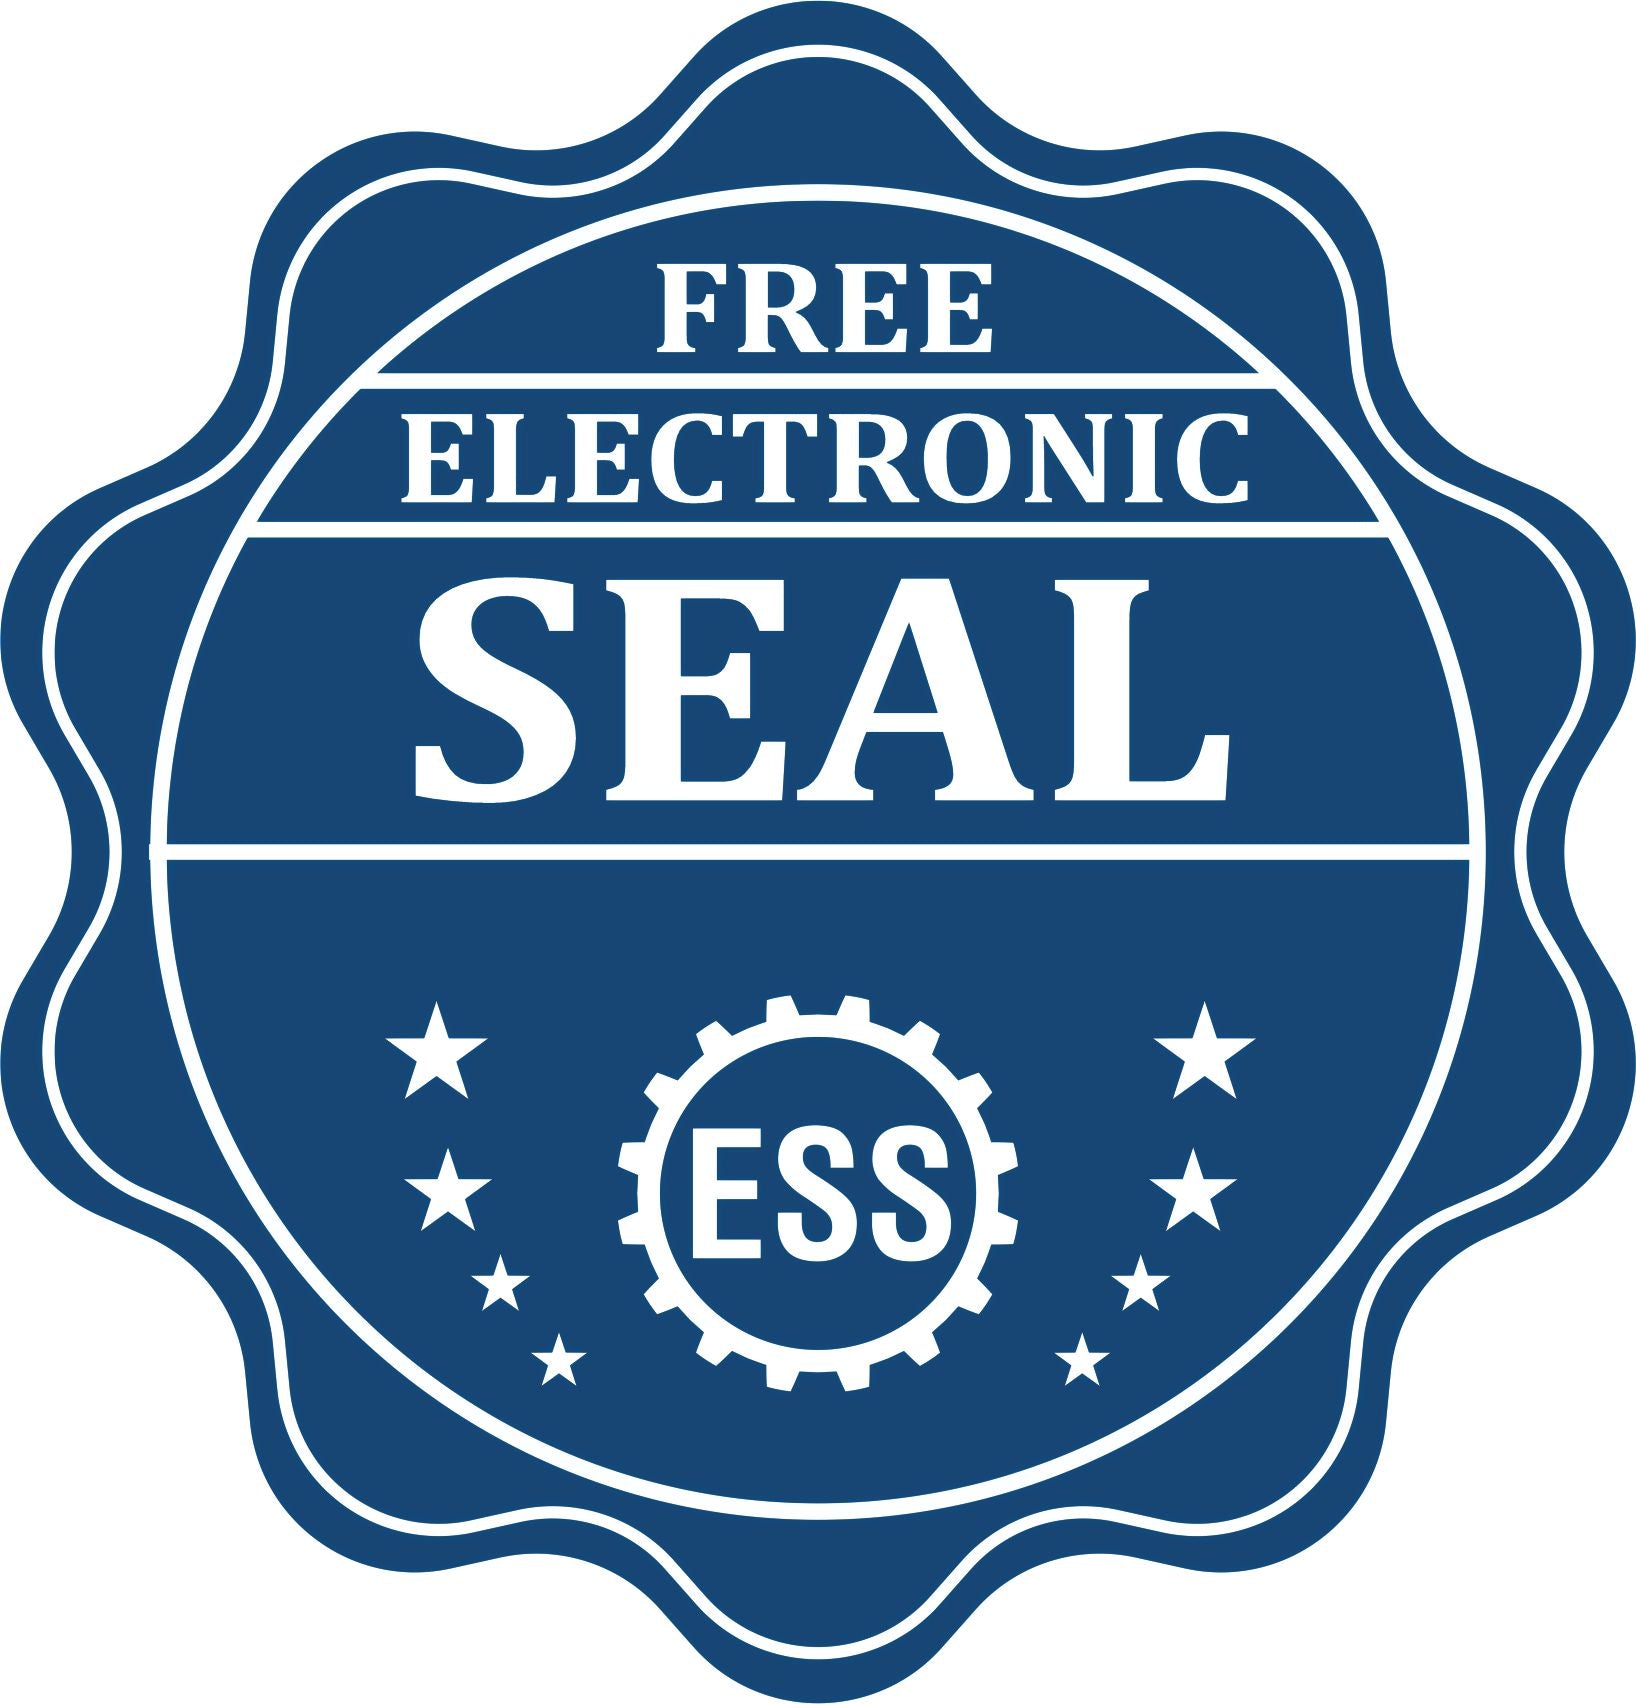 A badge showing a free electronic seal for the Gift Delaware Land Surveyor Seal with stars and the ESS gear on the emblem.